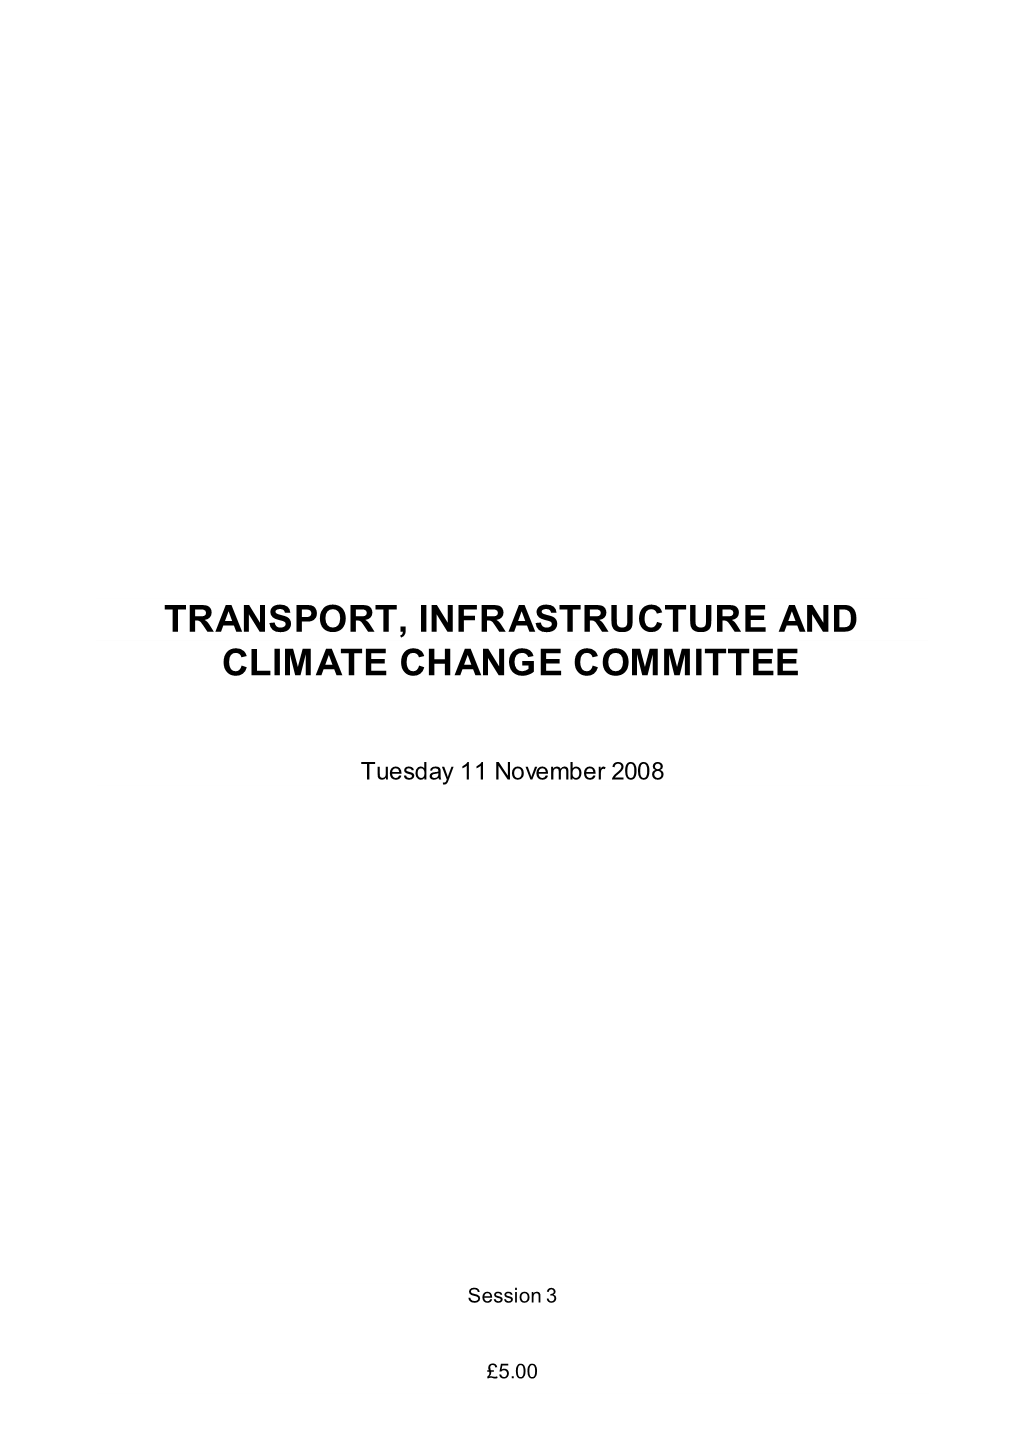 Transport, Infrastructure and Climate Change Committee